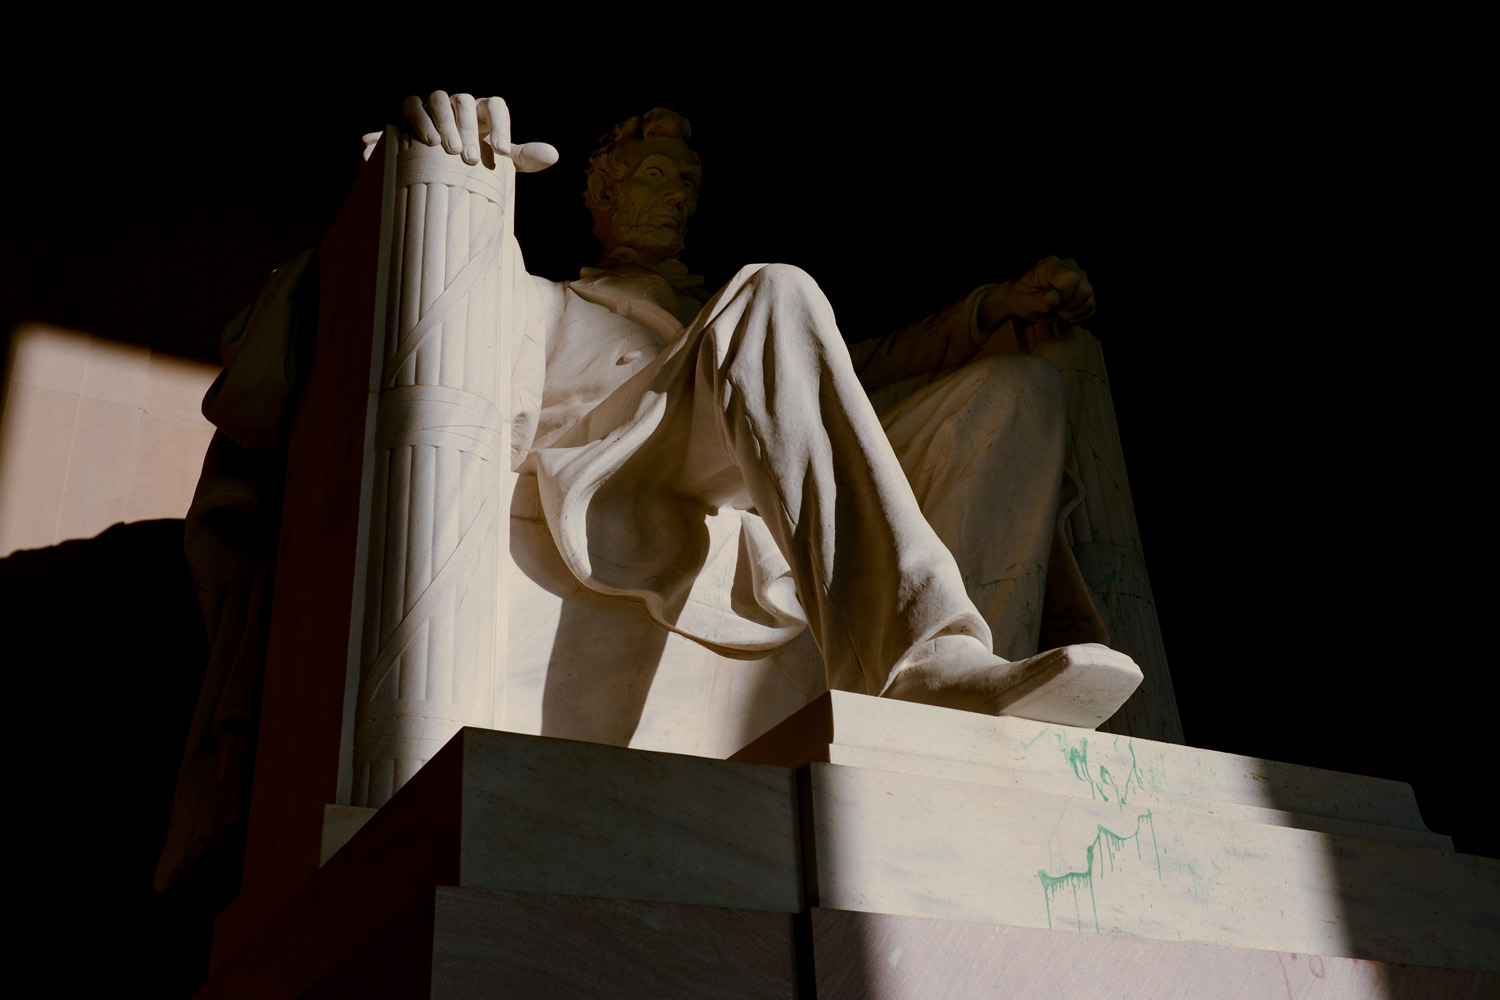 July 29, 2013. Splotches of green paint are still visible on the Lincoln Memorial after someone defaced the monument in Washington.